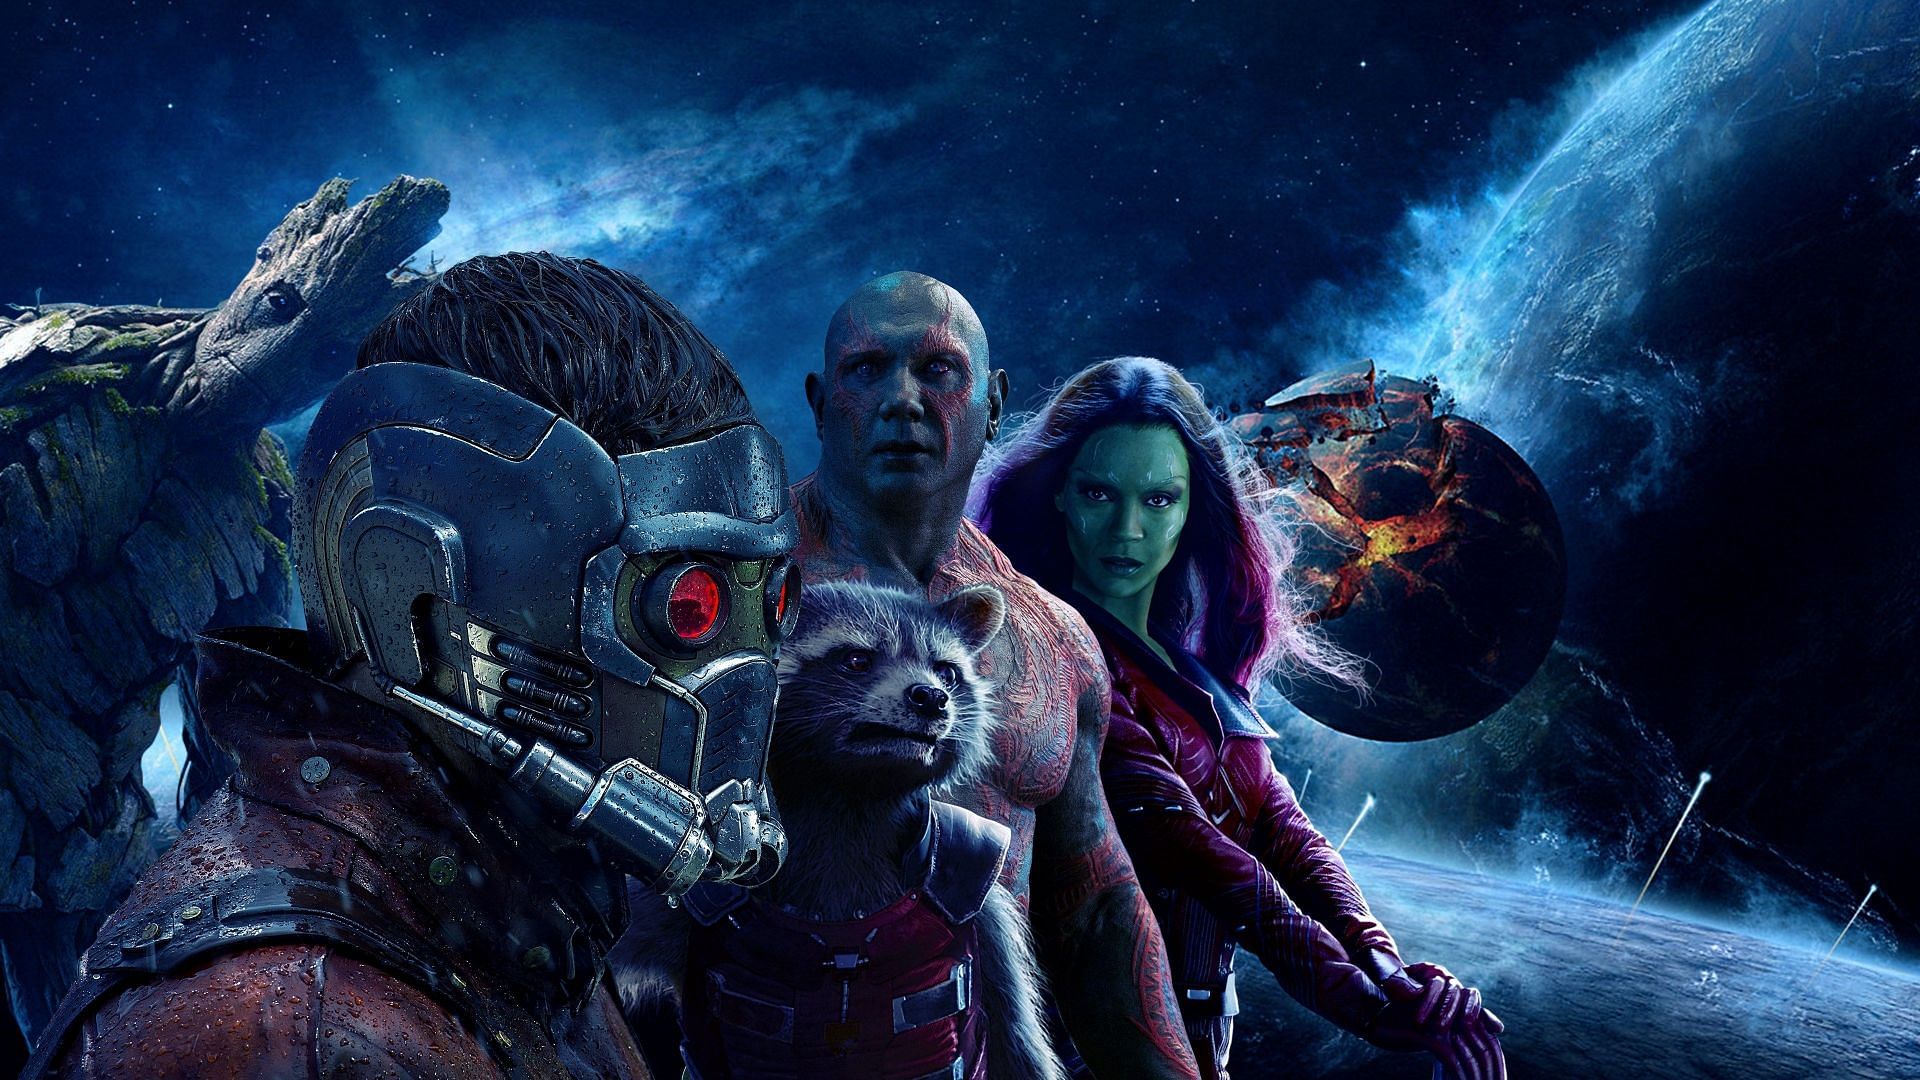 At the heart of the Guardians of the Galaxy